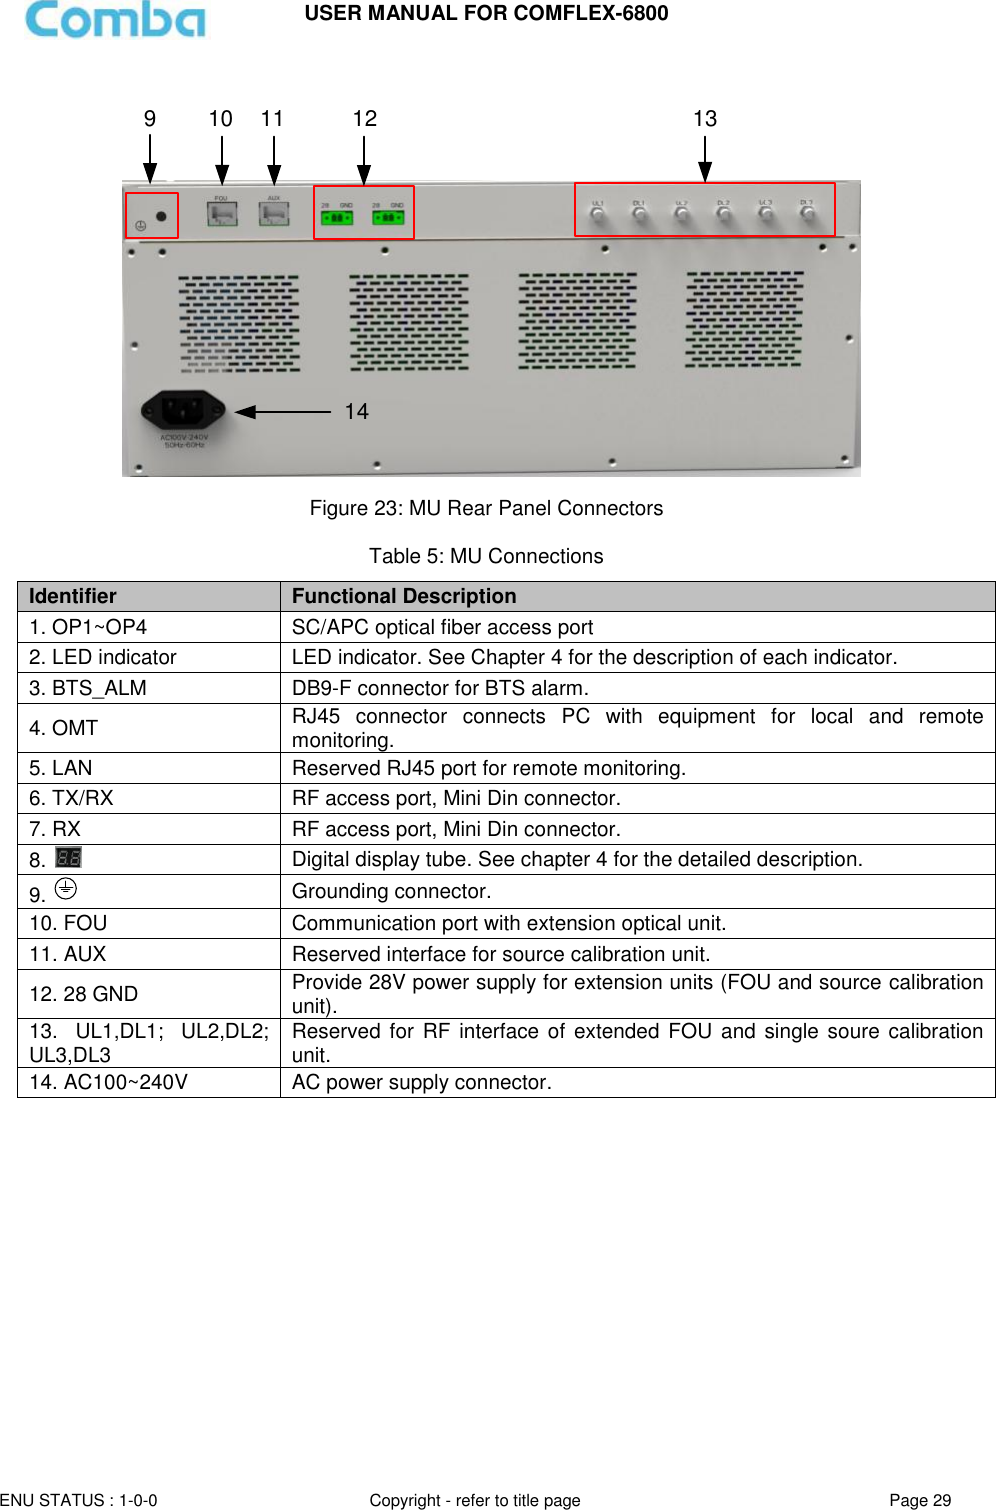 USER MANUAL FOR COMFLEX-6800  ENU STATUS : 1-0-0 Copyright - refer to title page Page 29   9 10 11 12 1314 Figure 23: MU Rear Panel Connectors  Table 5: MU Connections Identifier Functional Description 1. OP1~OP4 SC/APC optical fiber access port 2. LED indicator LED indicator. See Chapter 4 for the description of each indicator.  3. BTS_ALM DB9-F connector for BTS alarm. 4. OMT RJ45  connector  connects  PC  with  equipment  for  local  and  remote monitoring. 5. LAN Reserved RJ45 port for remote monitoring. 6. TX/RX RF access port, Mini Din connector. 7. RX RF access port, Mini Din connector. 8.   Digital display tube. See chapter 4 for the detailed description. 9.   Grounding connector. 10. FOU Communication port with extension optical unit. 11. AUX Reserved interface for source calibration unit. 12. 28 GND Provide 28V power supply for extension units (FOU and source calibration unit). 13.  UL1,DL1;  UL2,DL2; UL3,DL3 Reserved for  RF interface of extended  FOU  and single soure calibration unit.  14. AC100~240V AC power supply connector.   